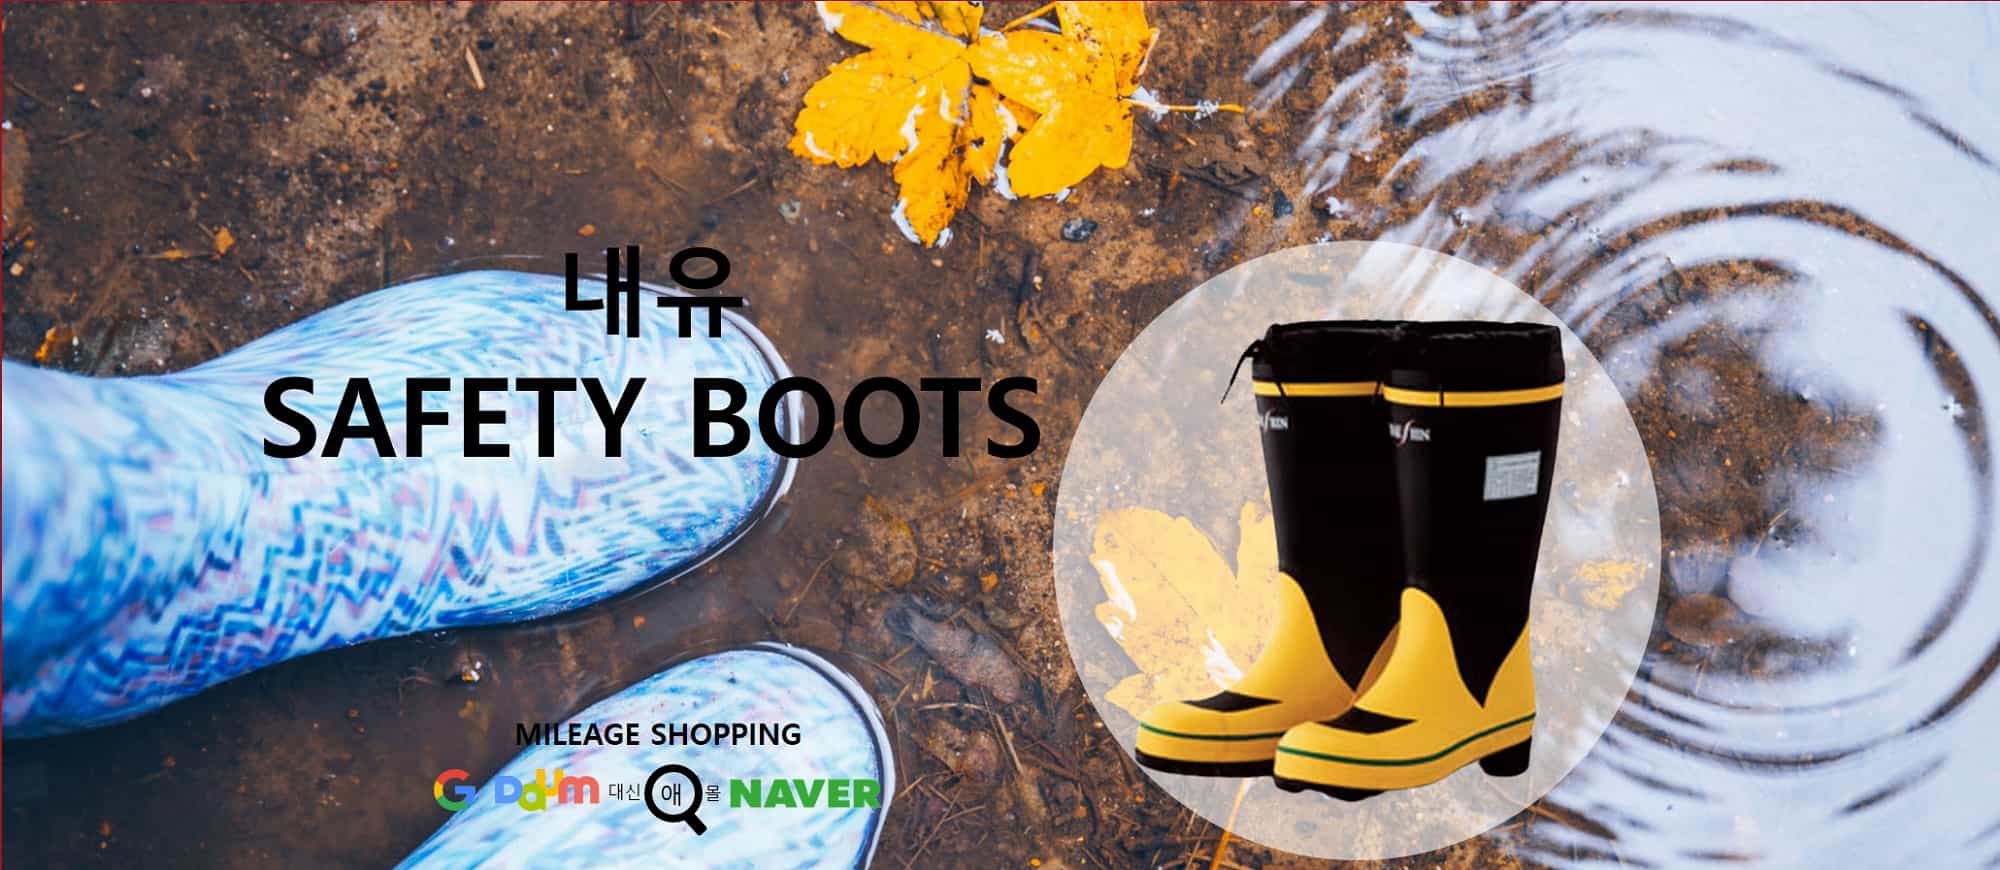 NON-SLIP SAFETY BOOTS